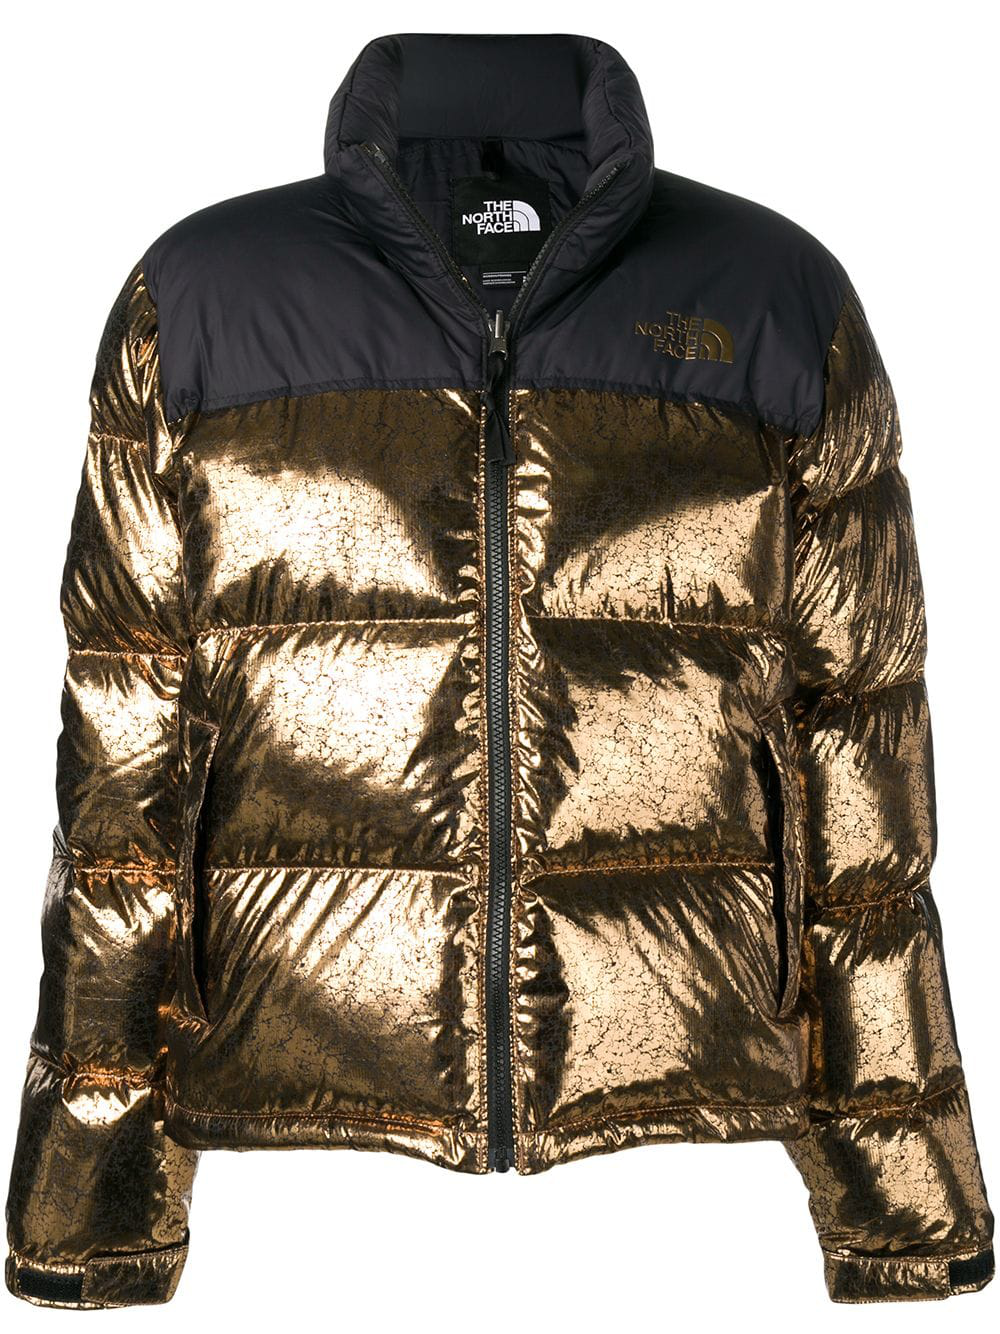 The North Face Metallic Puffer Jacket 